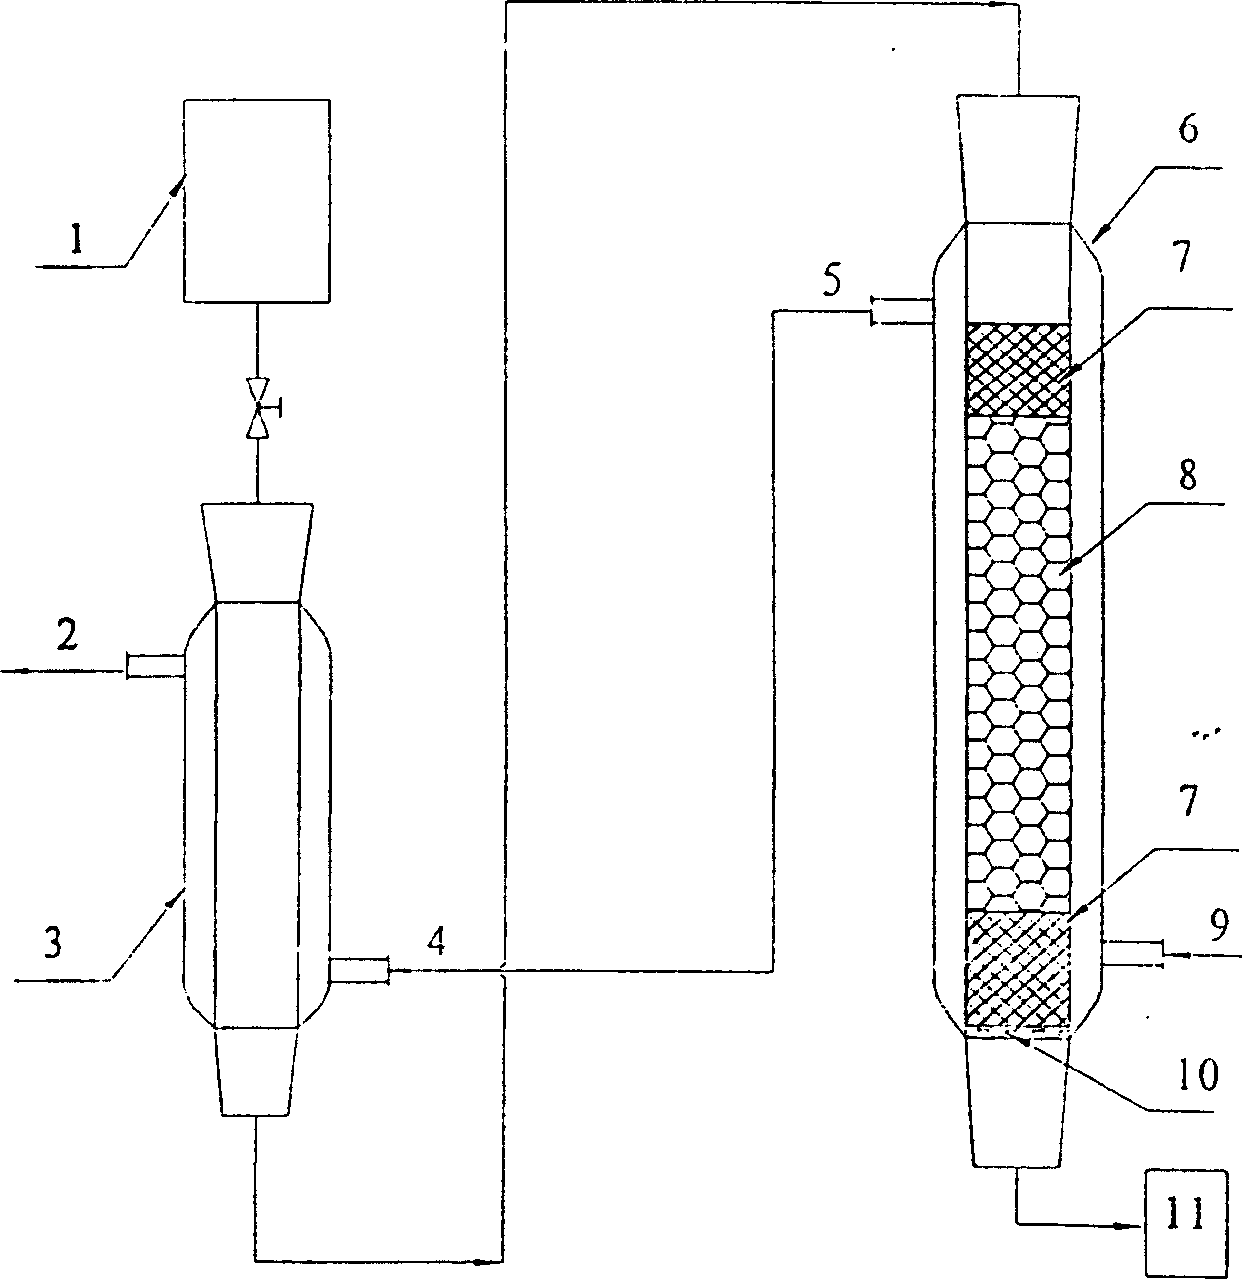 Device and method for catalytic synthesis of acetyl tri-n-butyl citrate by fixed bed reactor